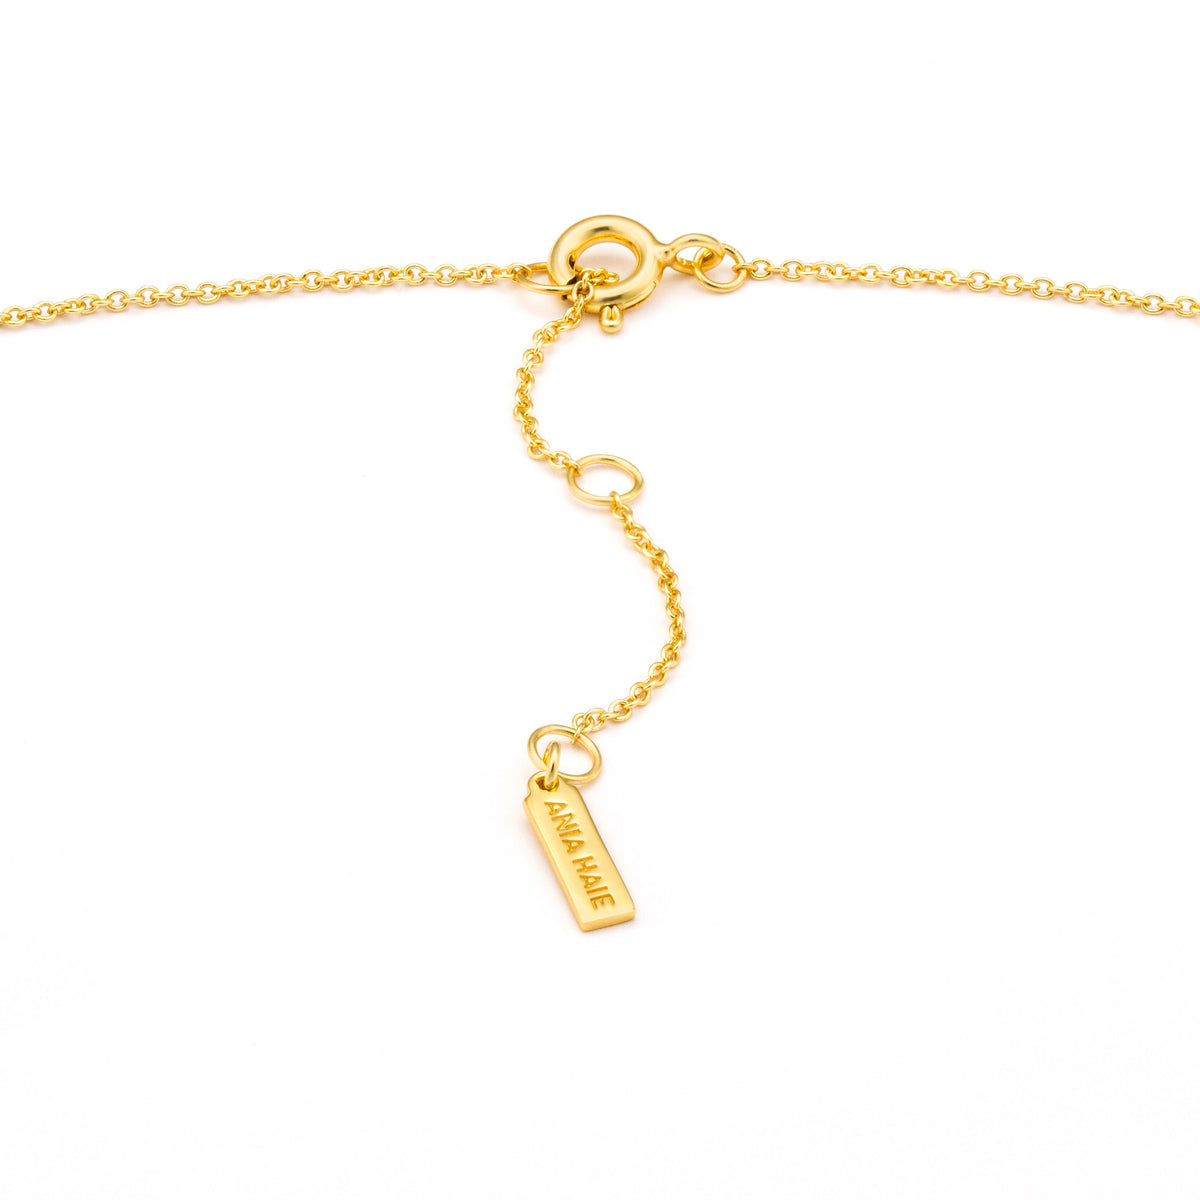 Sterling Silver Gold Plated Key Necklace By Ania Haie, Orin Jewelers